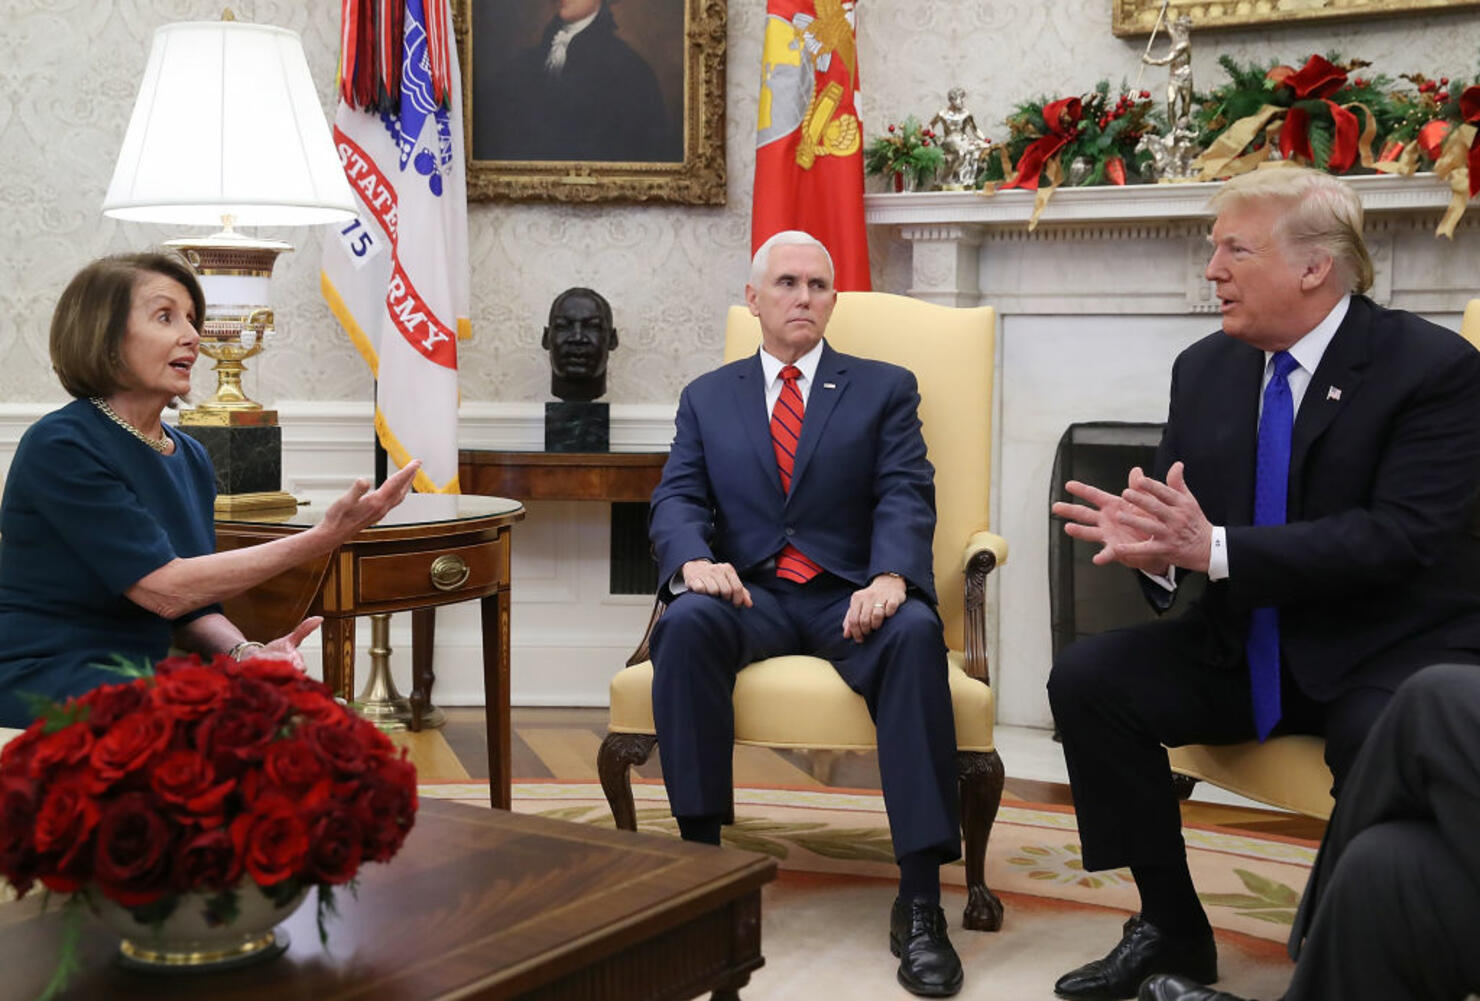 President Trump Meets With Nancy Pelosi And Chuck Schumer At White House